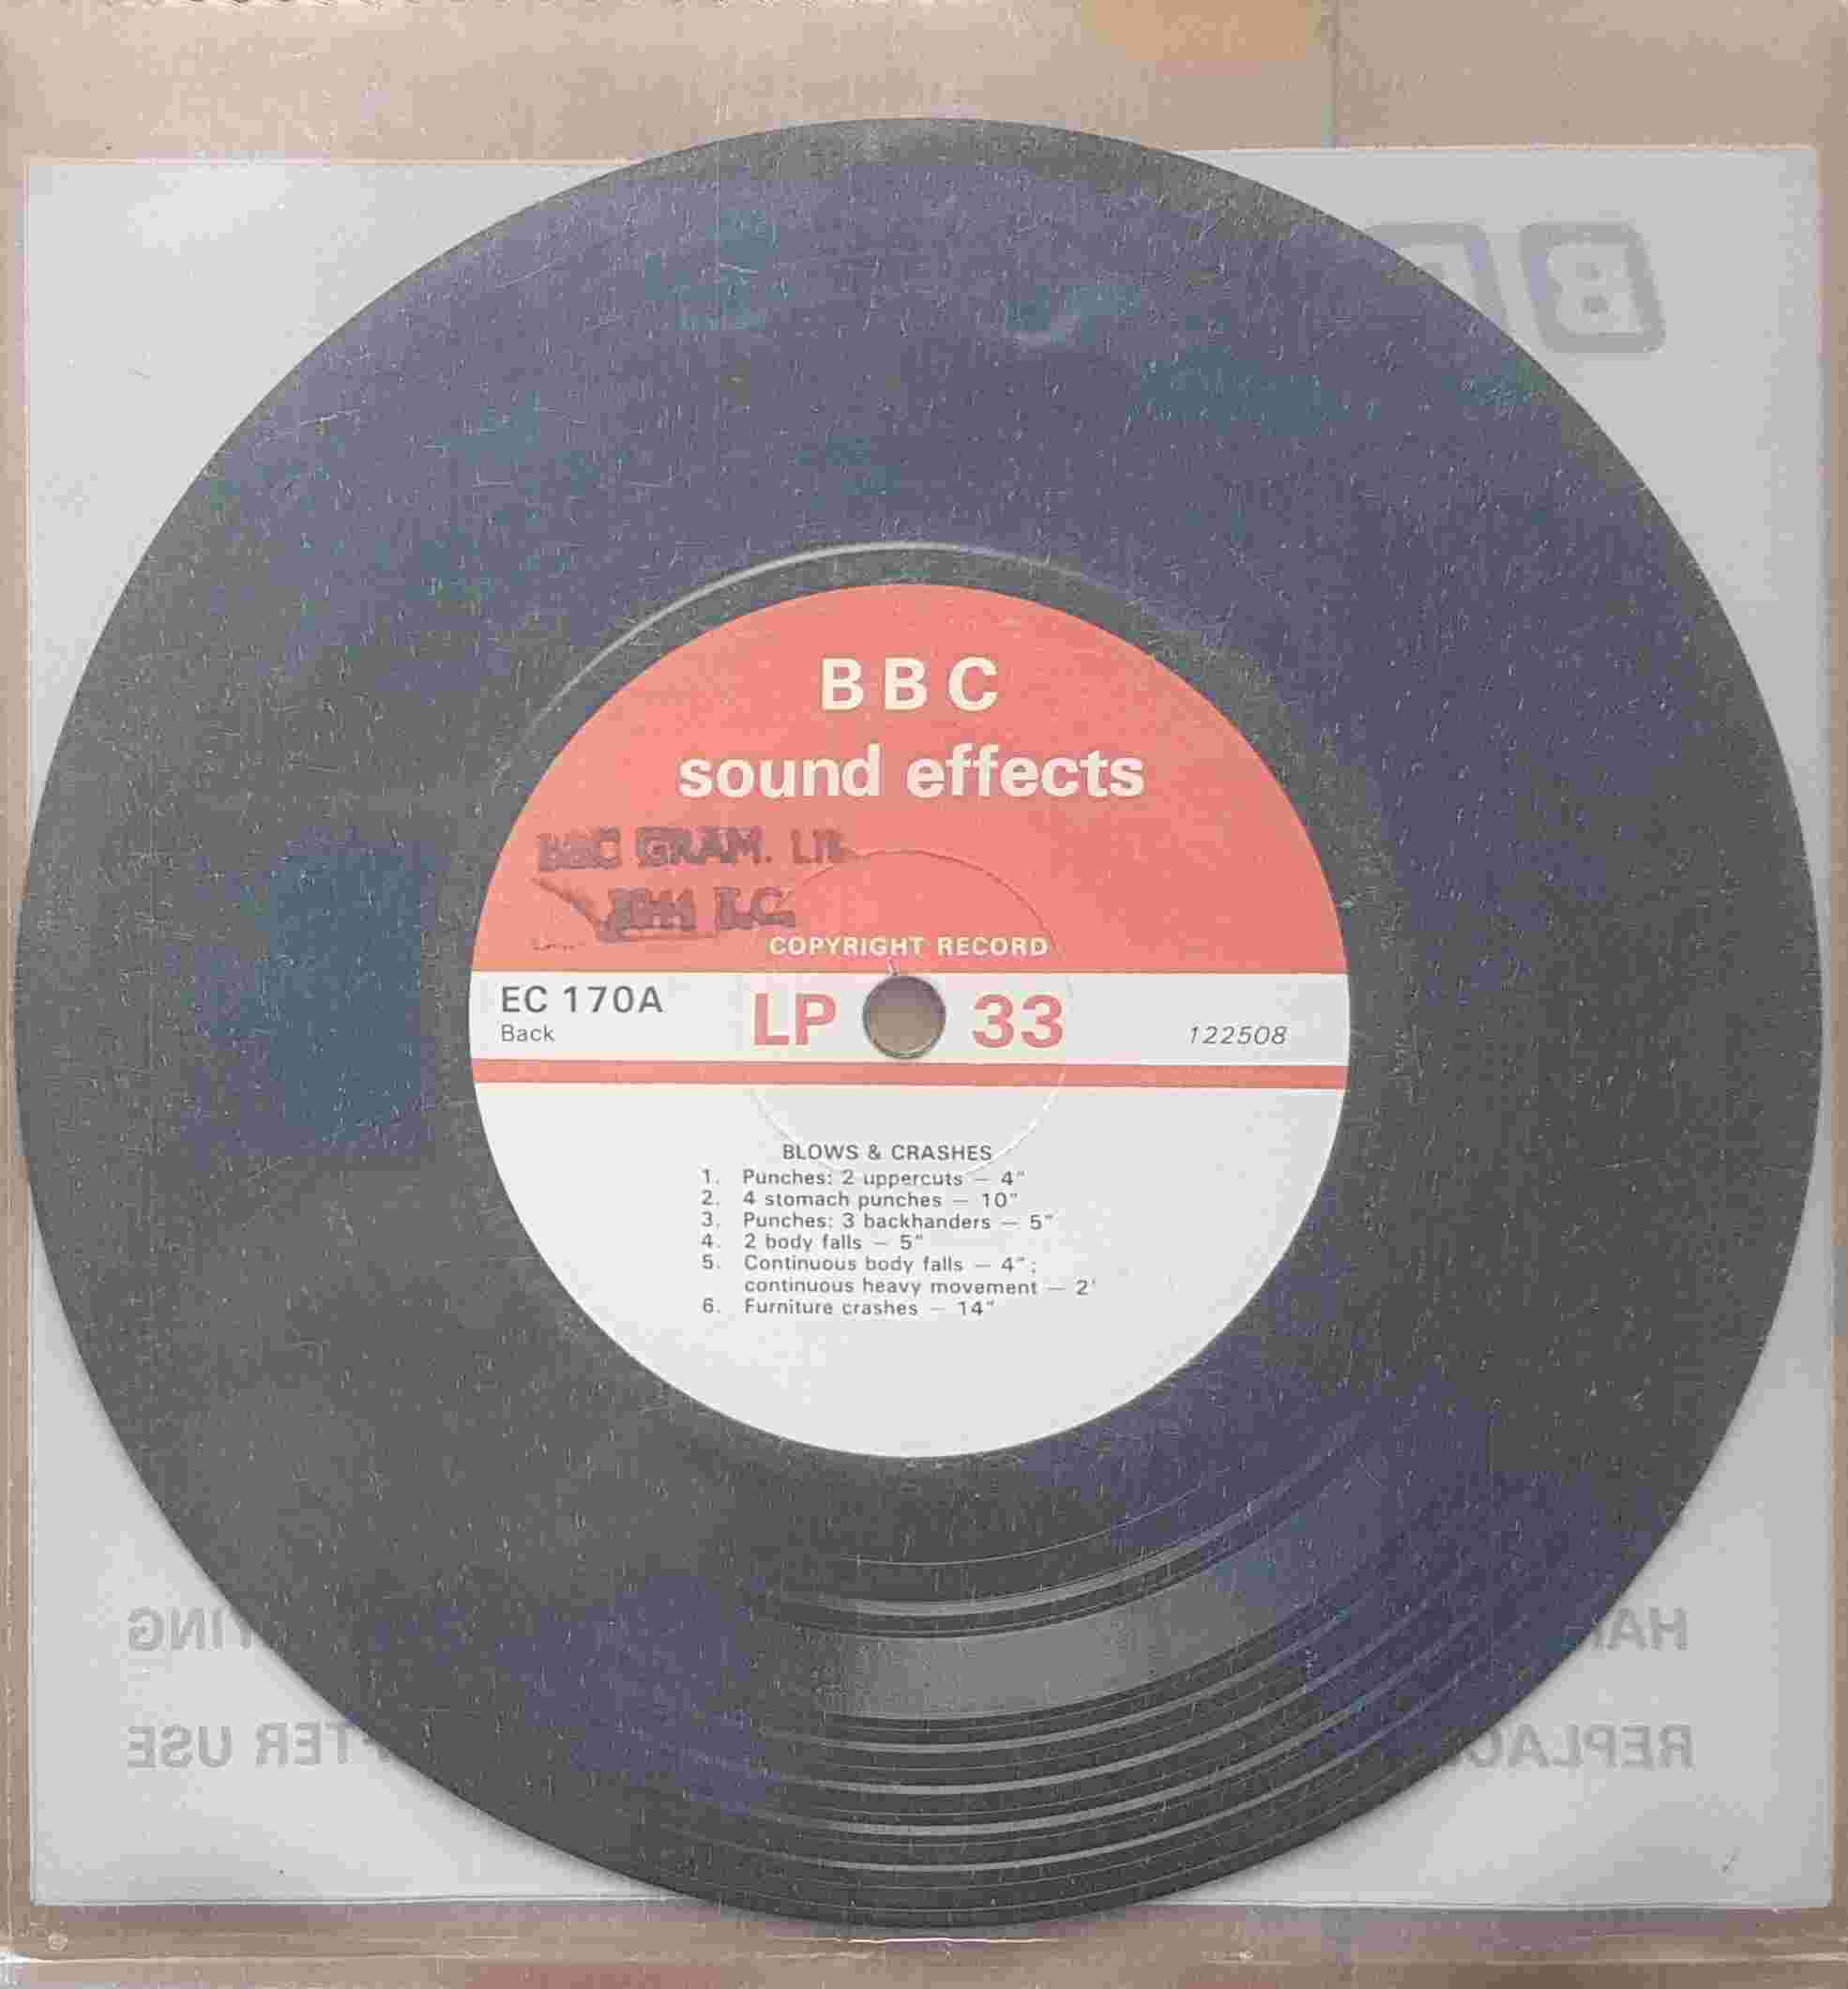 Picture of EC 170A Fights by artist Not registered from the BBC records and Tapes library